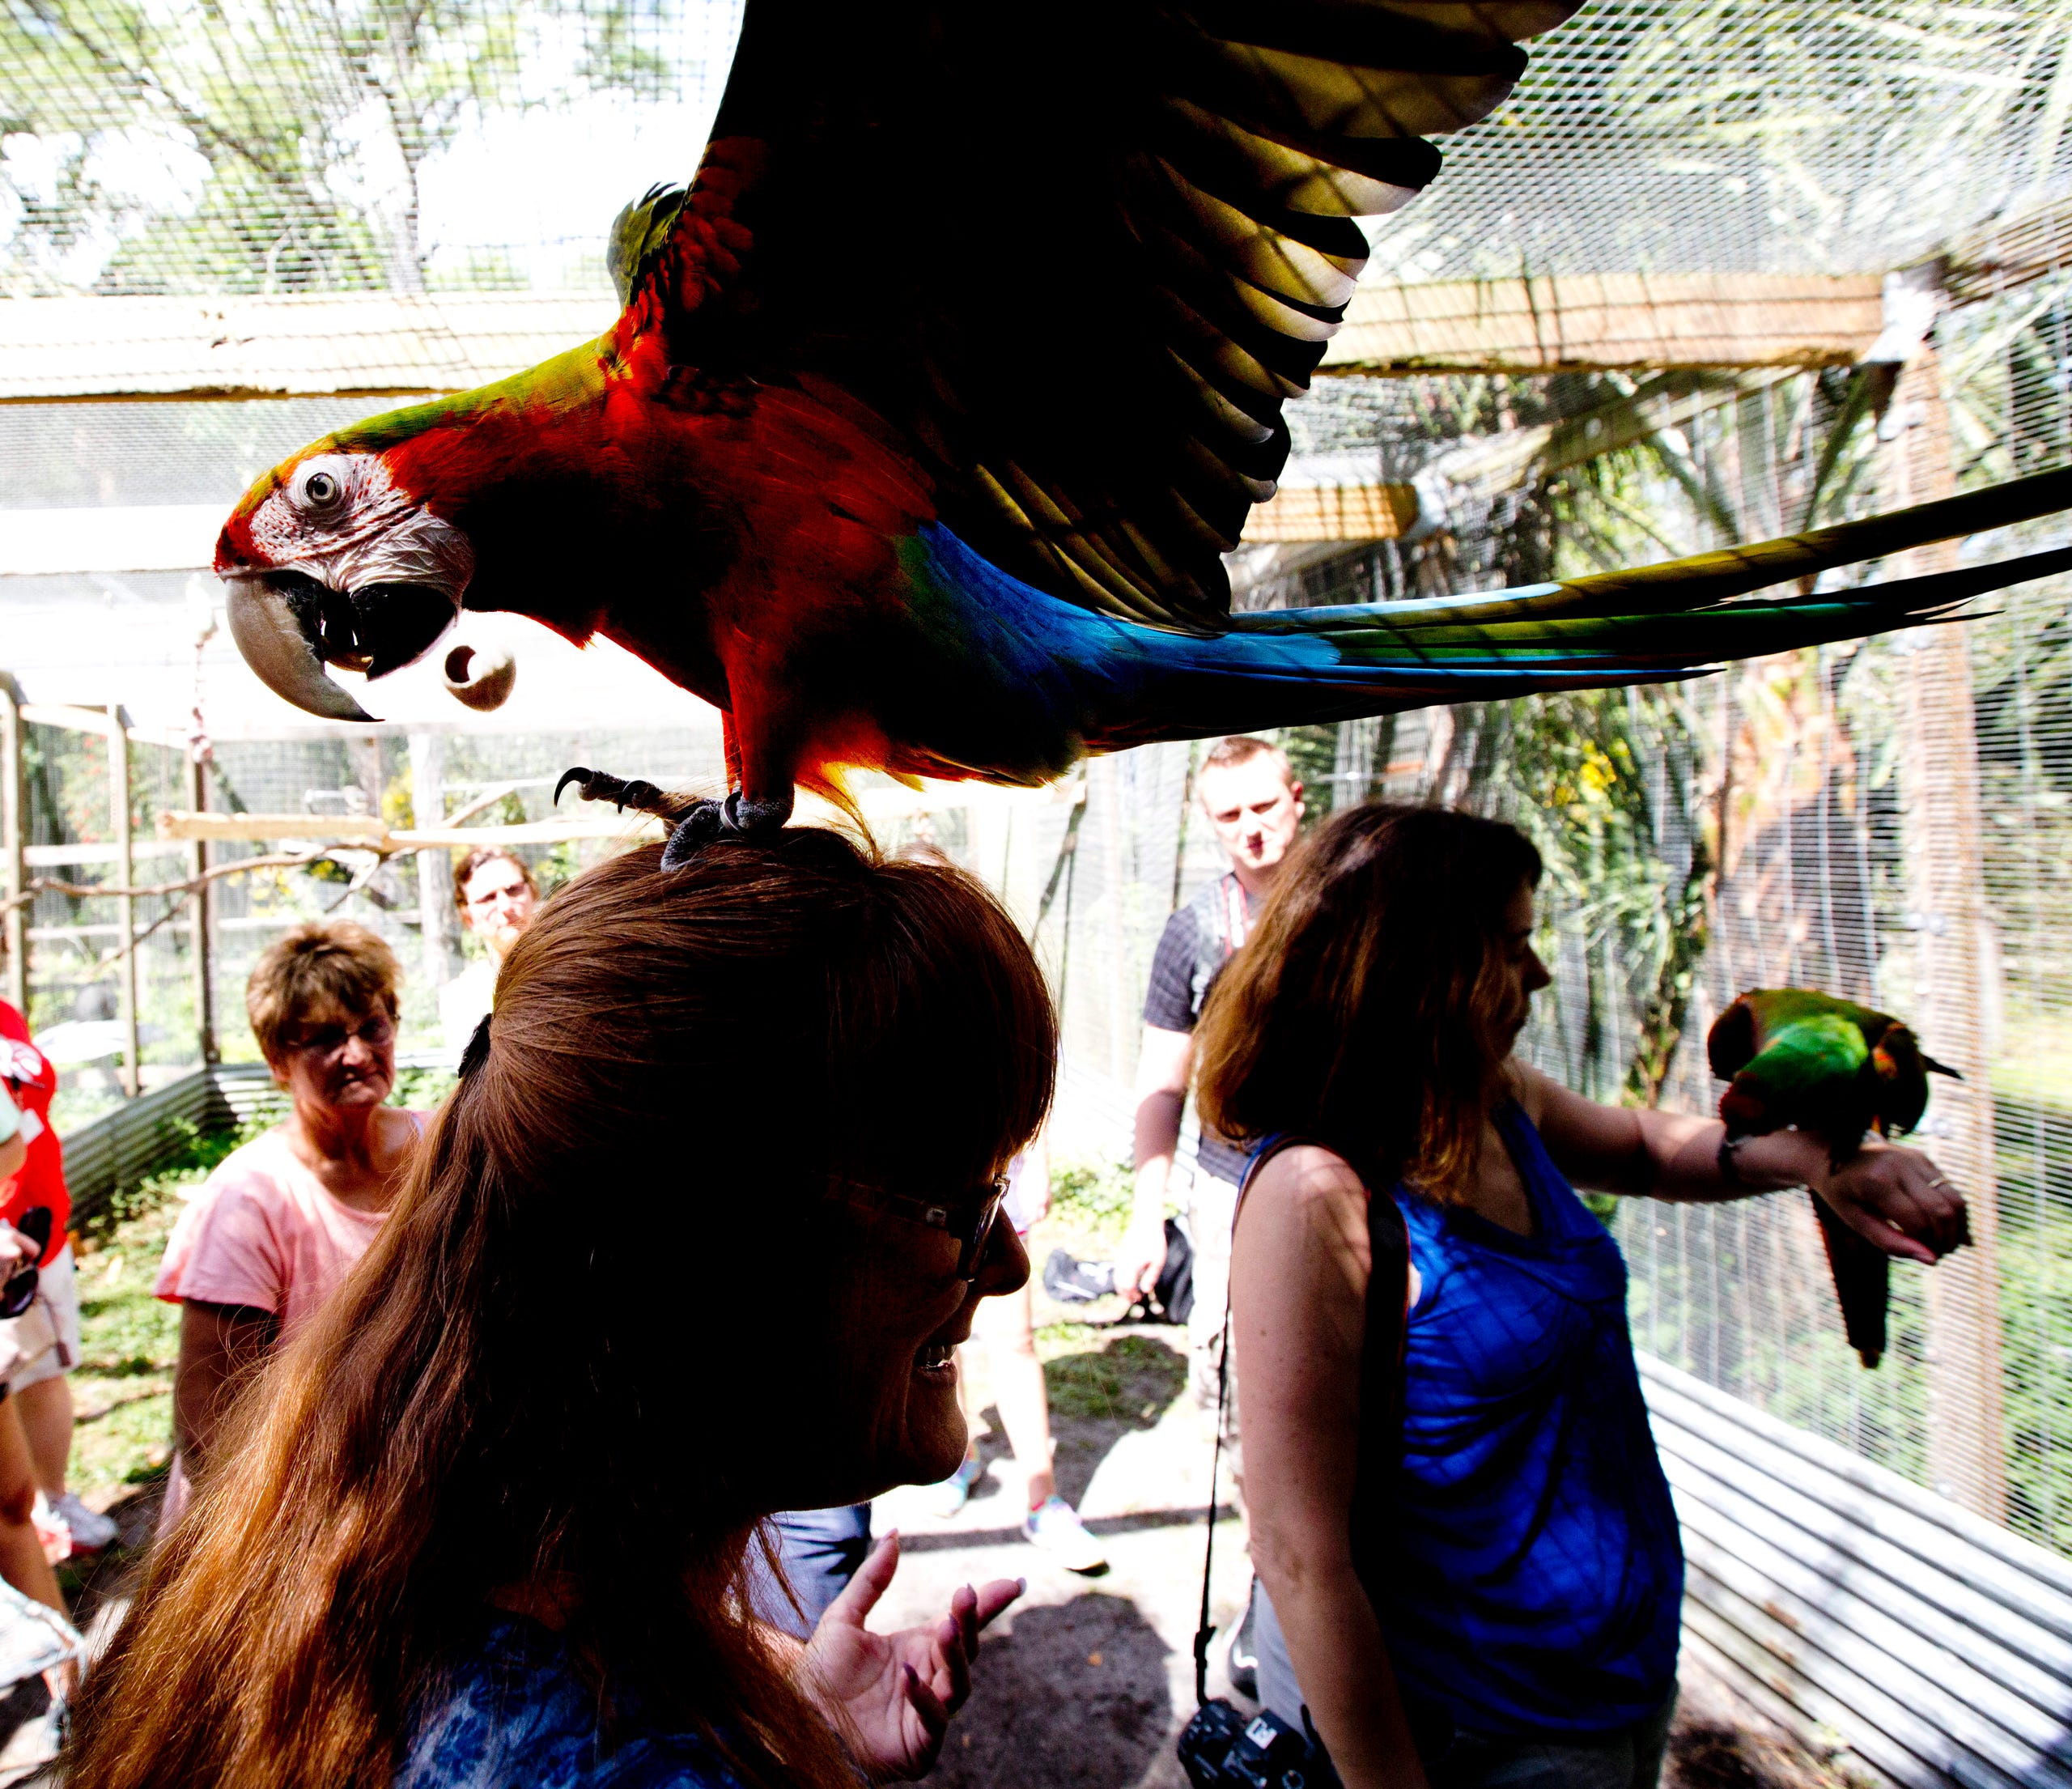 Bird Gardens Of Naples Offers Home To Unwanted Exotic Birds